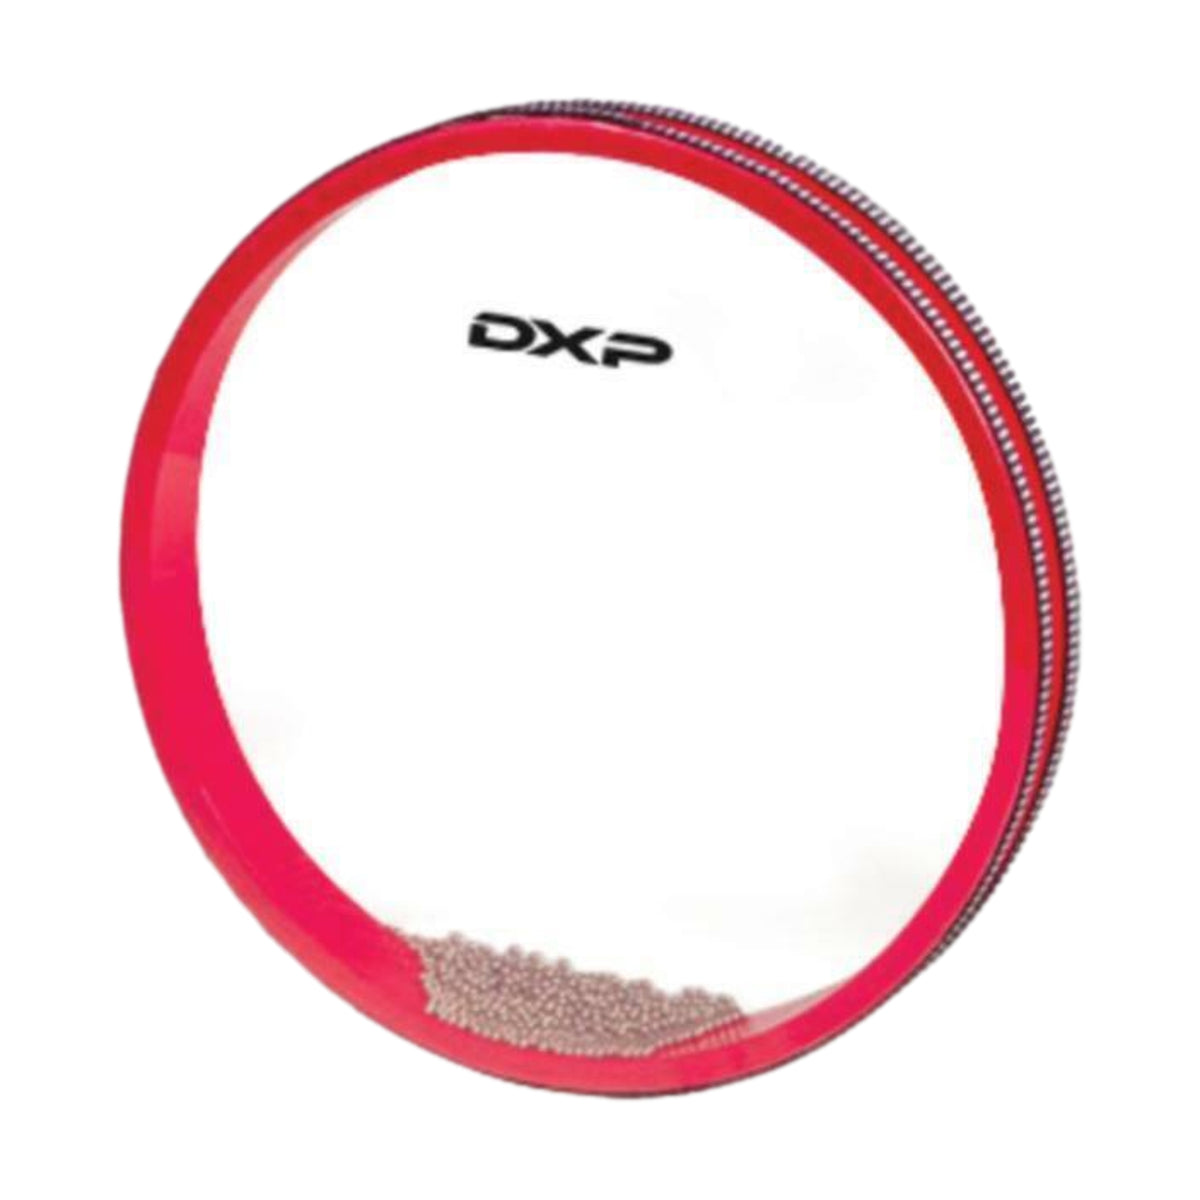 DXP 10 Inch Ocean Drum Non Tunable Red